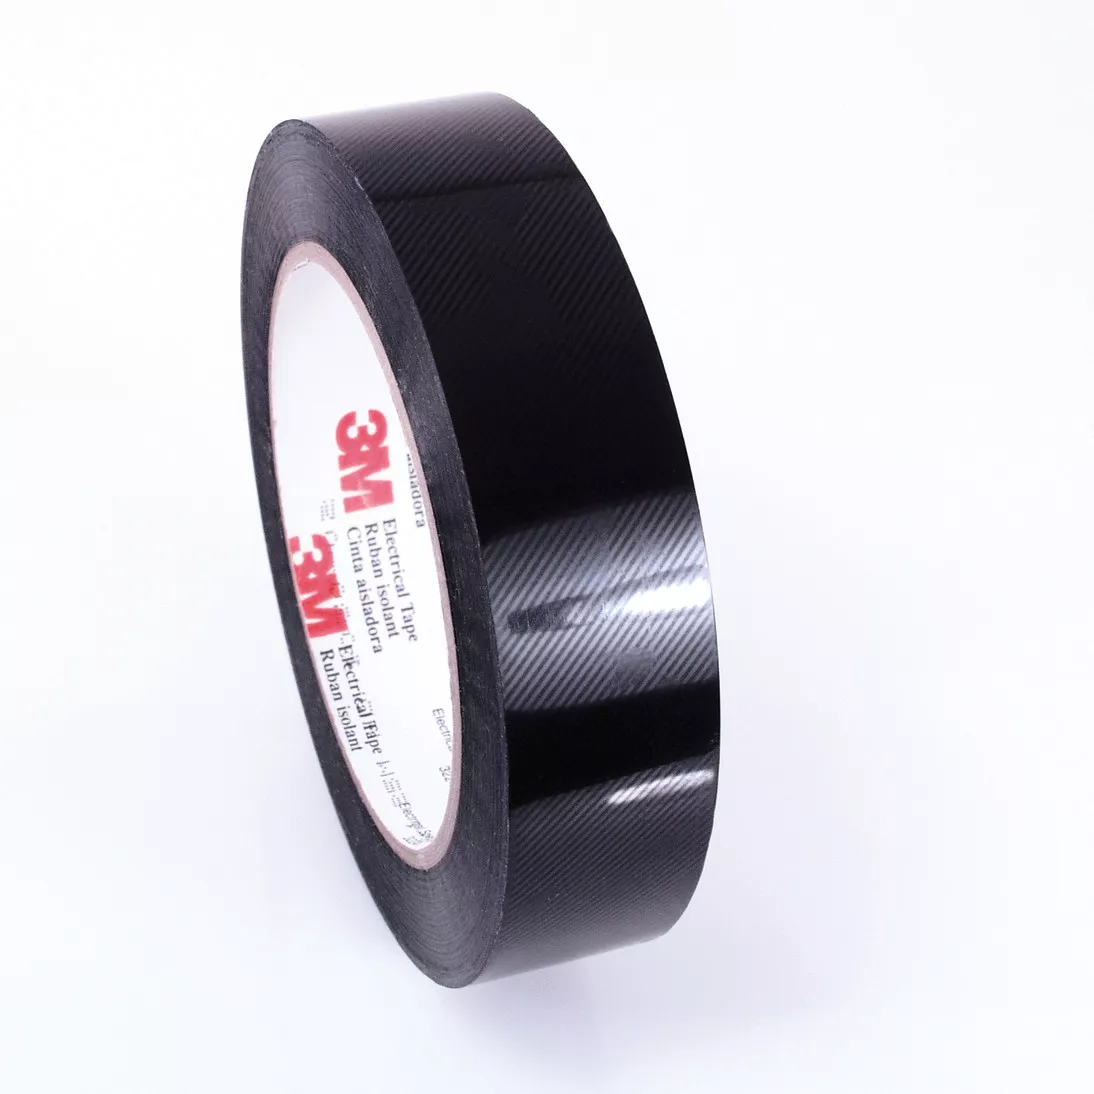 3M™ Polyester Film Electrical Tape 1318-2, Yellow, 1/2 in x 72 yd, 3 in
Paper Core, 72 Rolls/Case